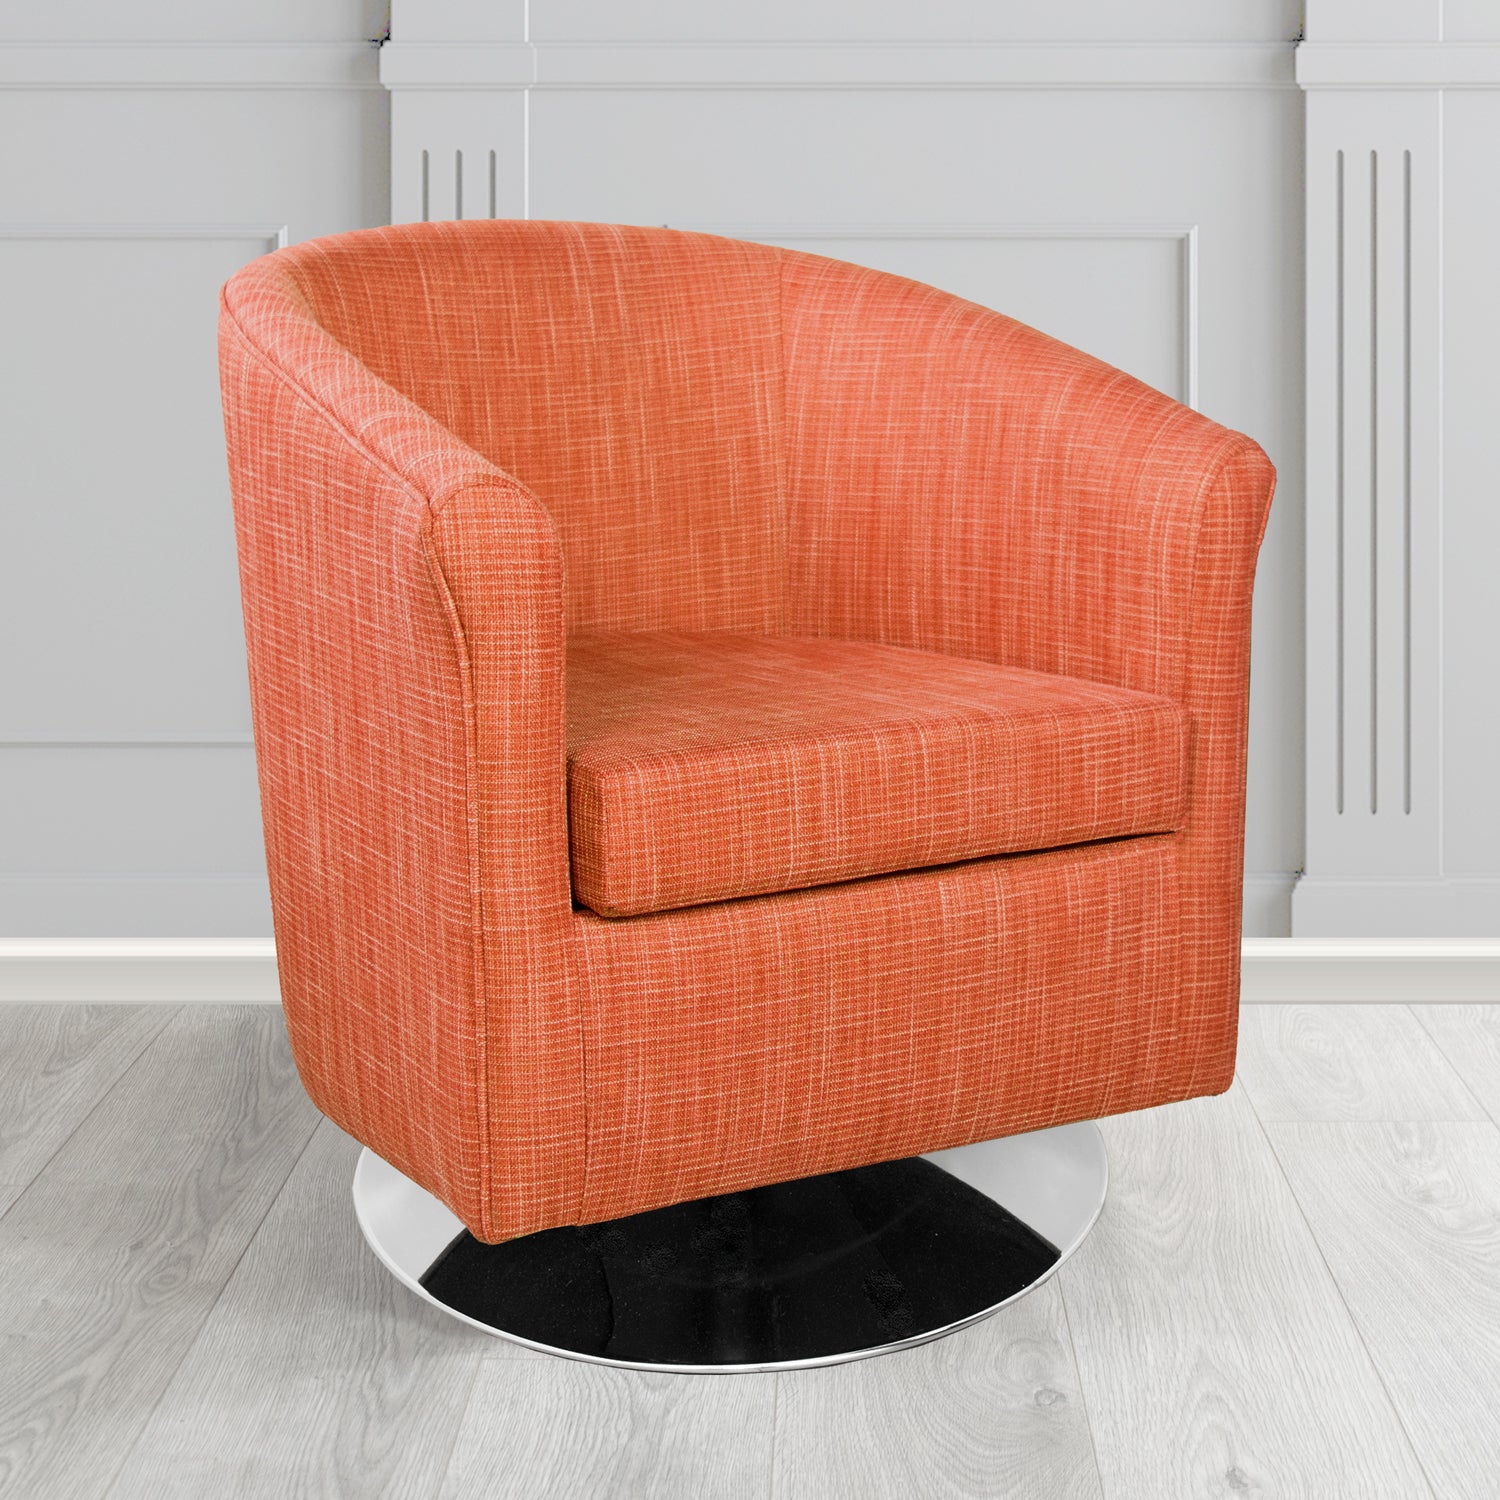 Tuscany Ravel Marmalade Contract Crib 5 Fabric Swivel Tub Chair - Antimicrobial & Water-Resistant - The Tub Chair Shop